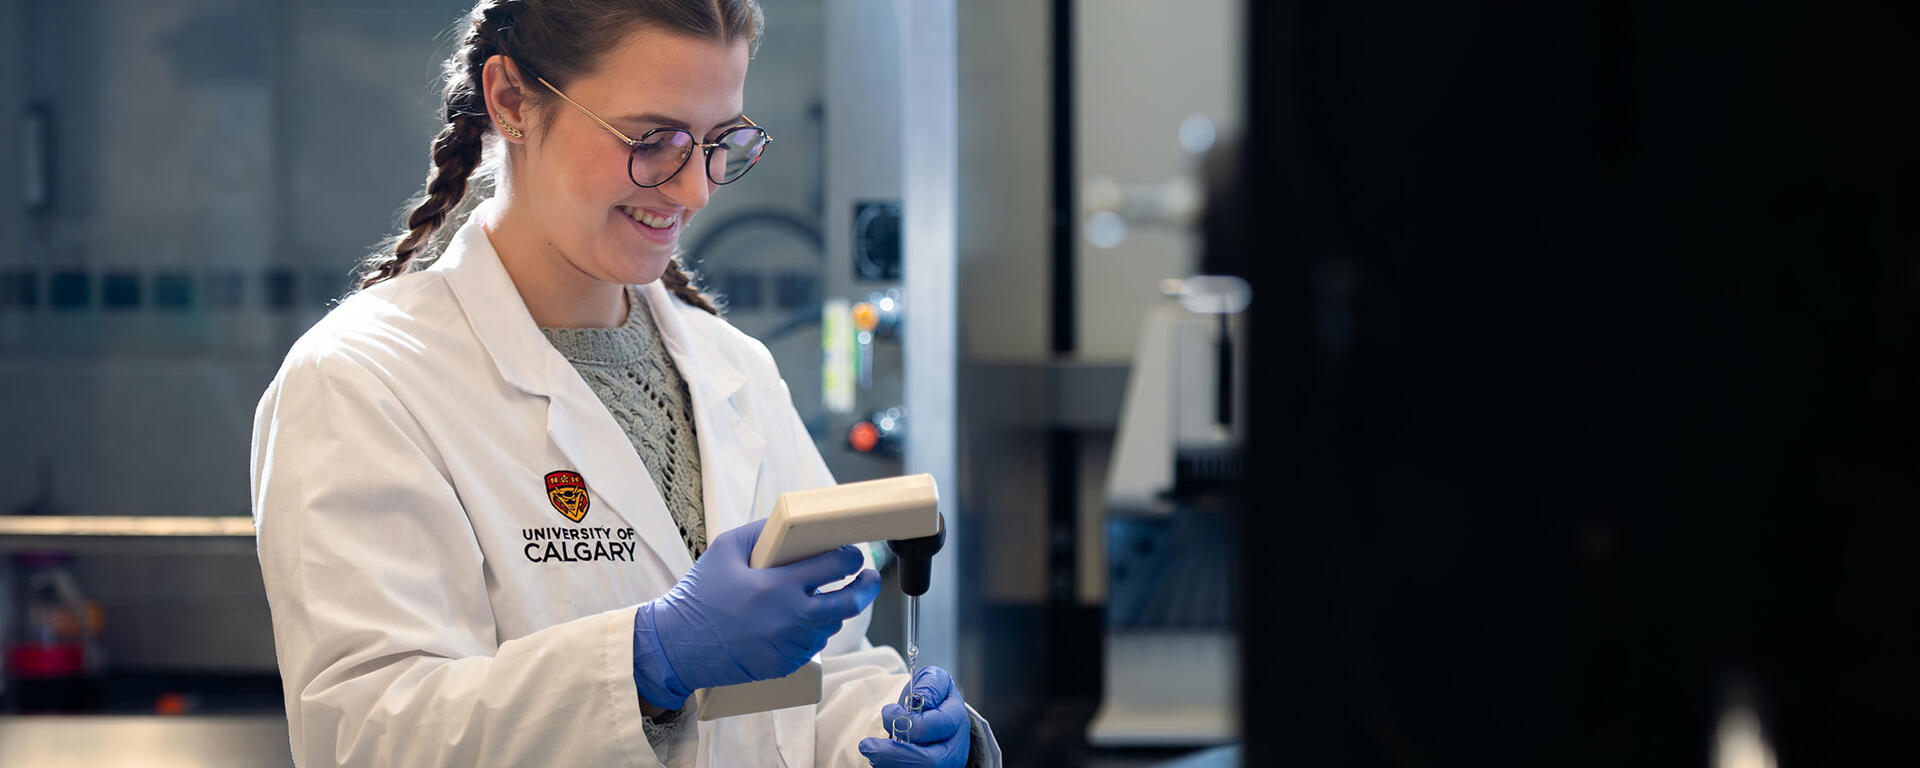 A young woman is working in a lab, wearing a University of Calgary lab coat.